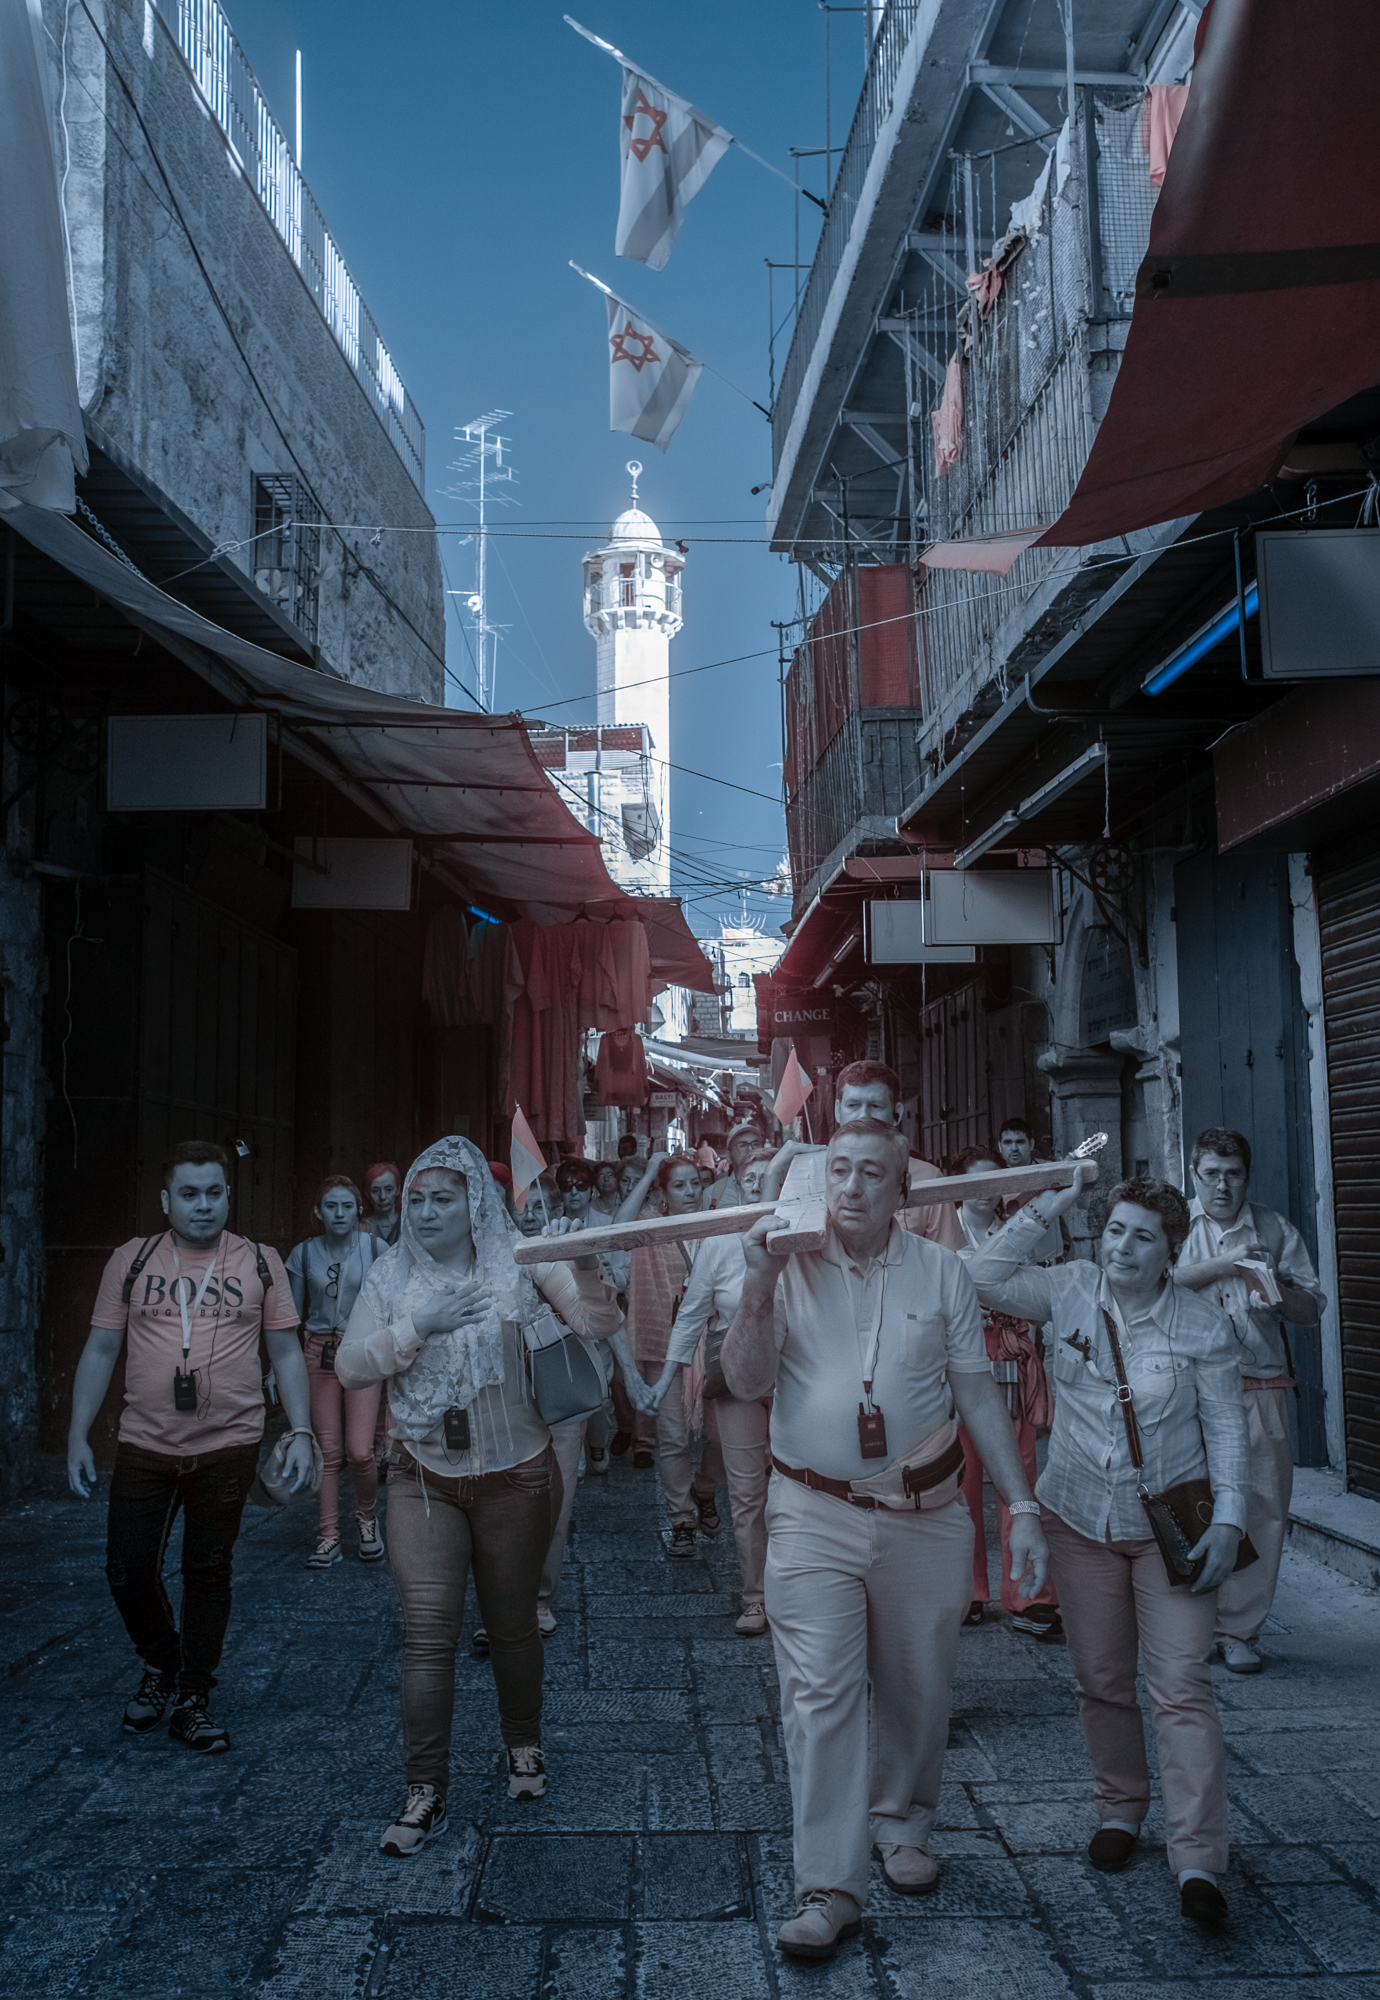 A group of Guatemalan pilgrims carry a cross along the Via Dolorosa under Israeli flags and the minaret of the mosque. The Via Dolorosa is the path Jesus was believed to have walked to his crucifixion.